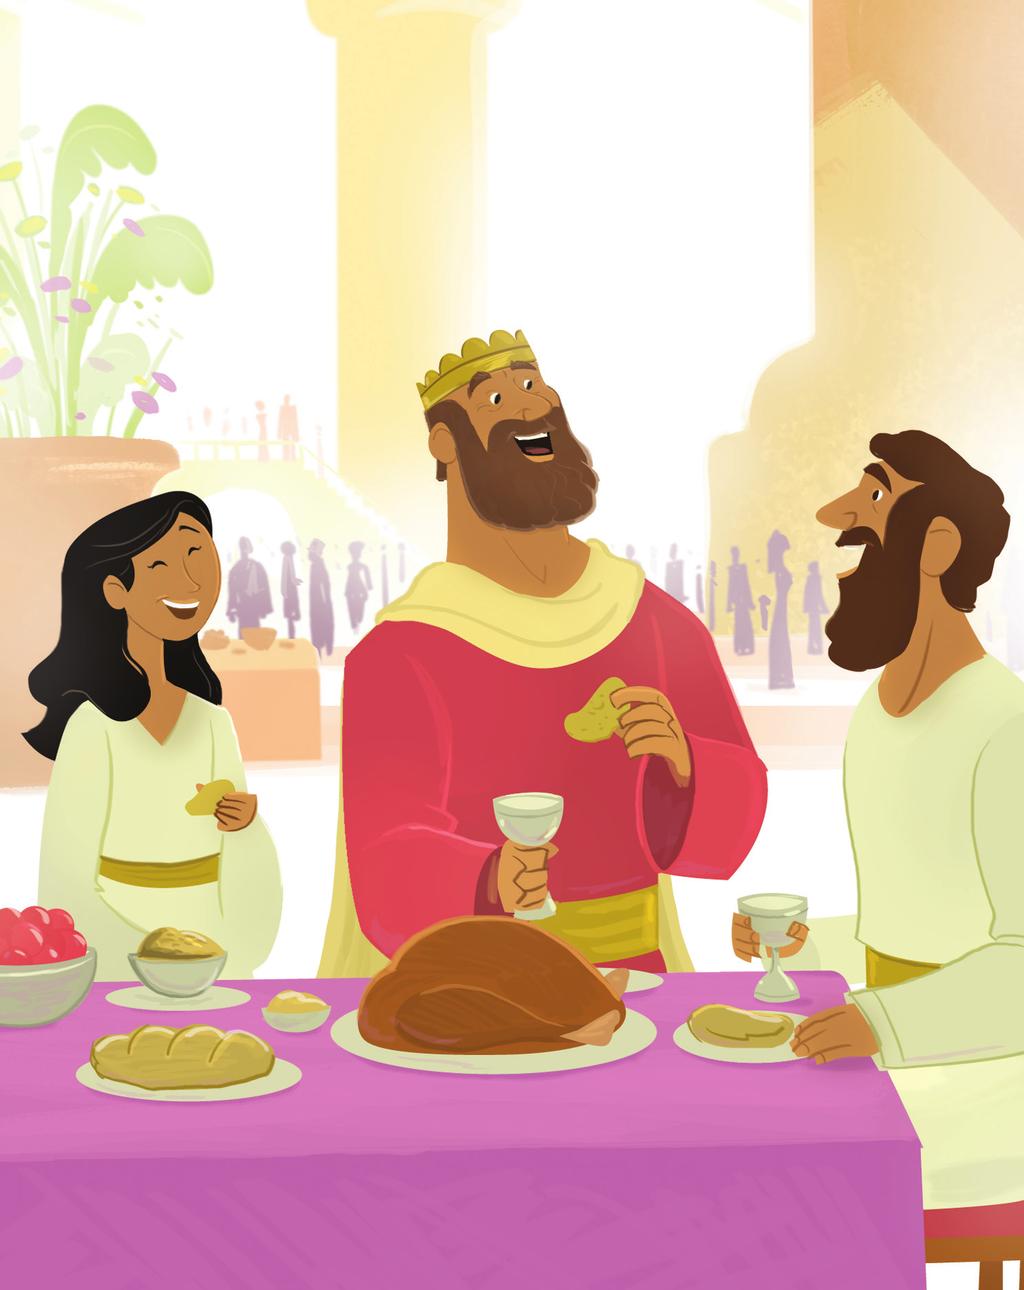 UNIT 30 Session 2 Parable of the Wedding Feast